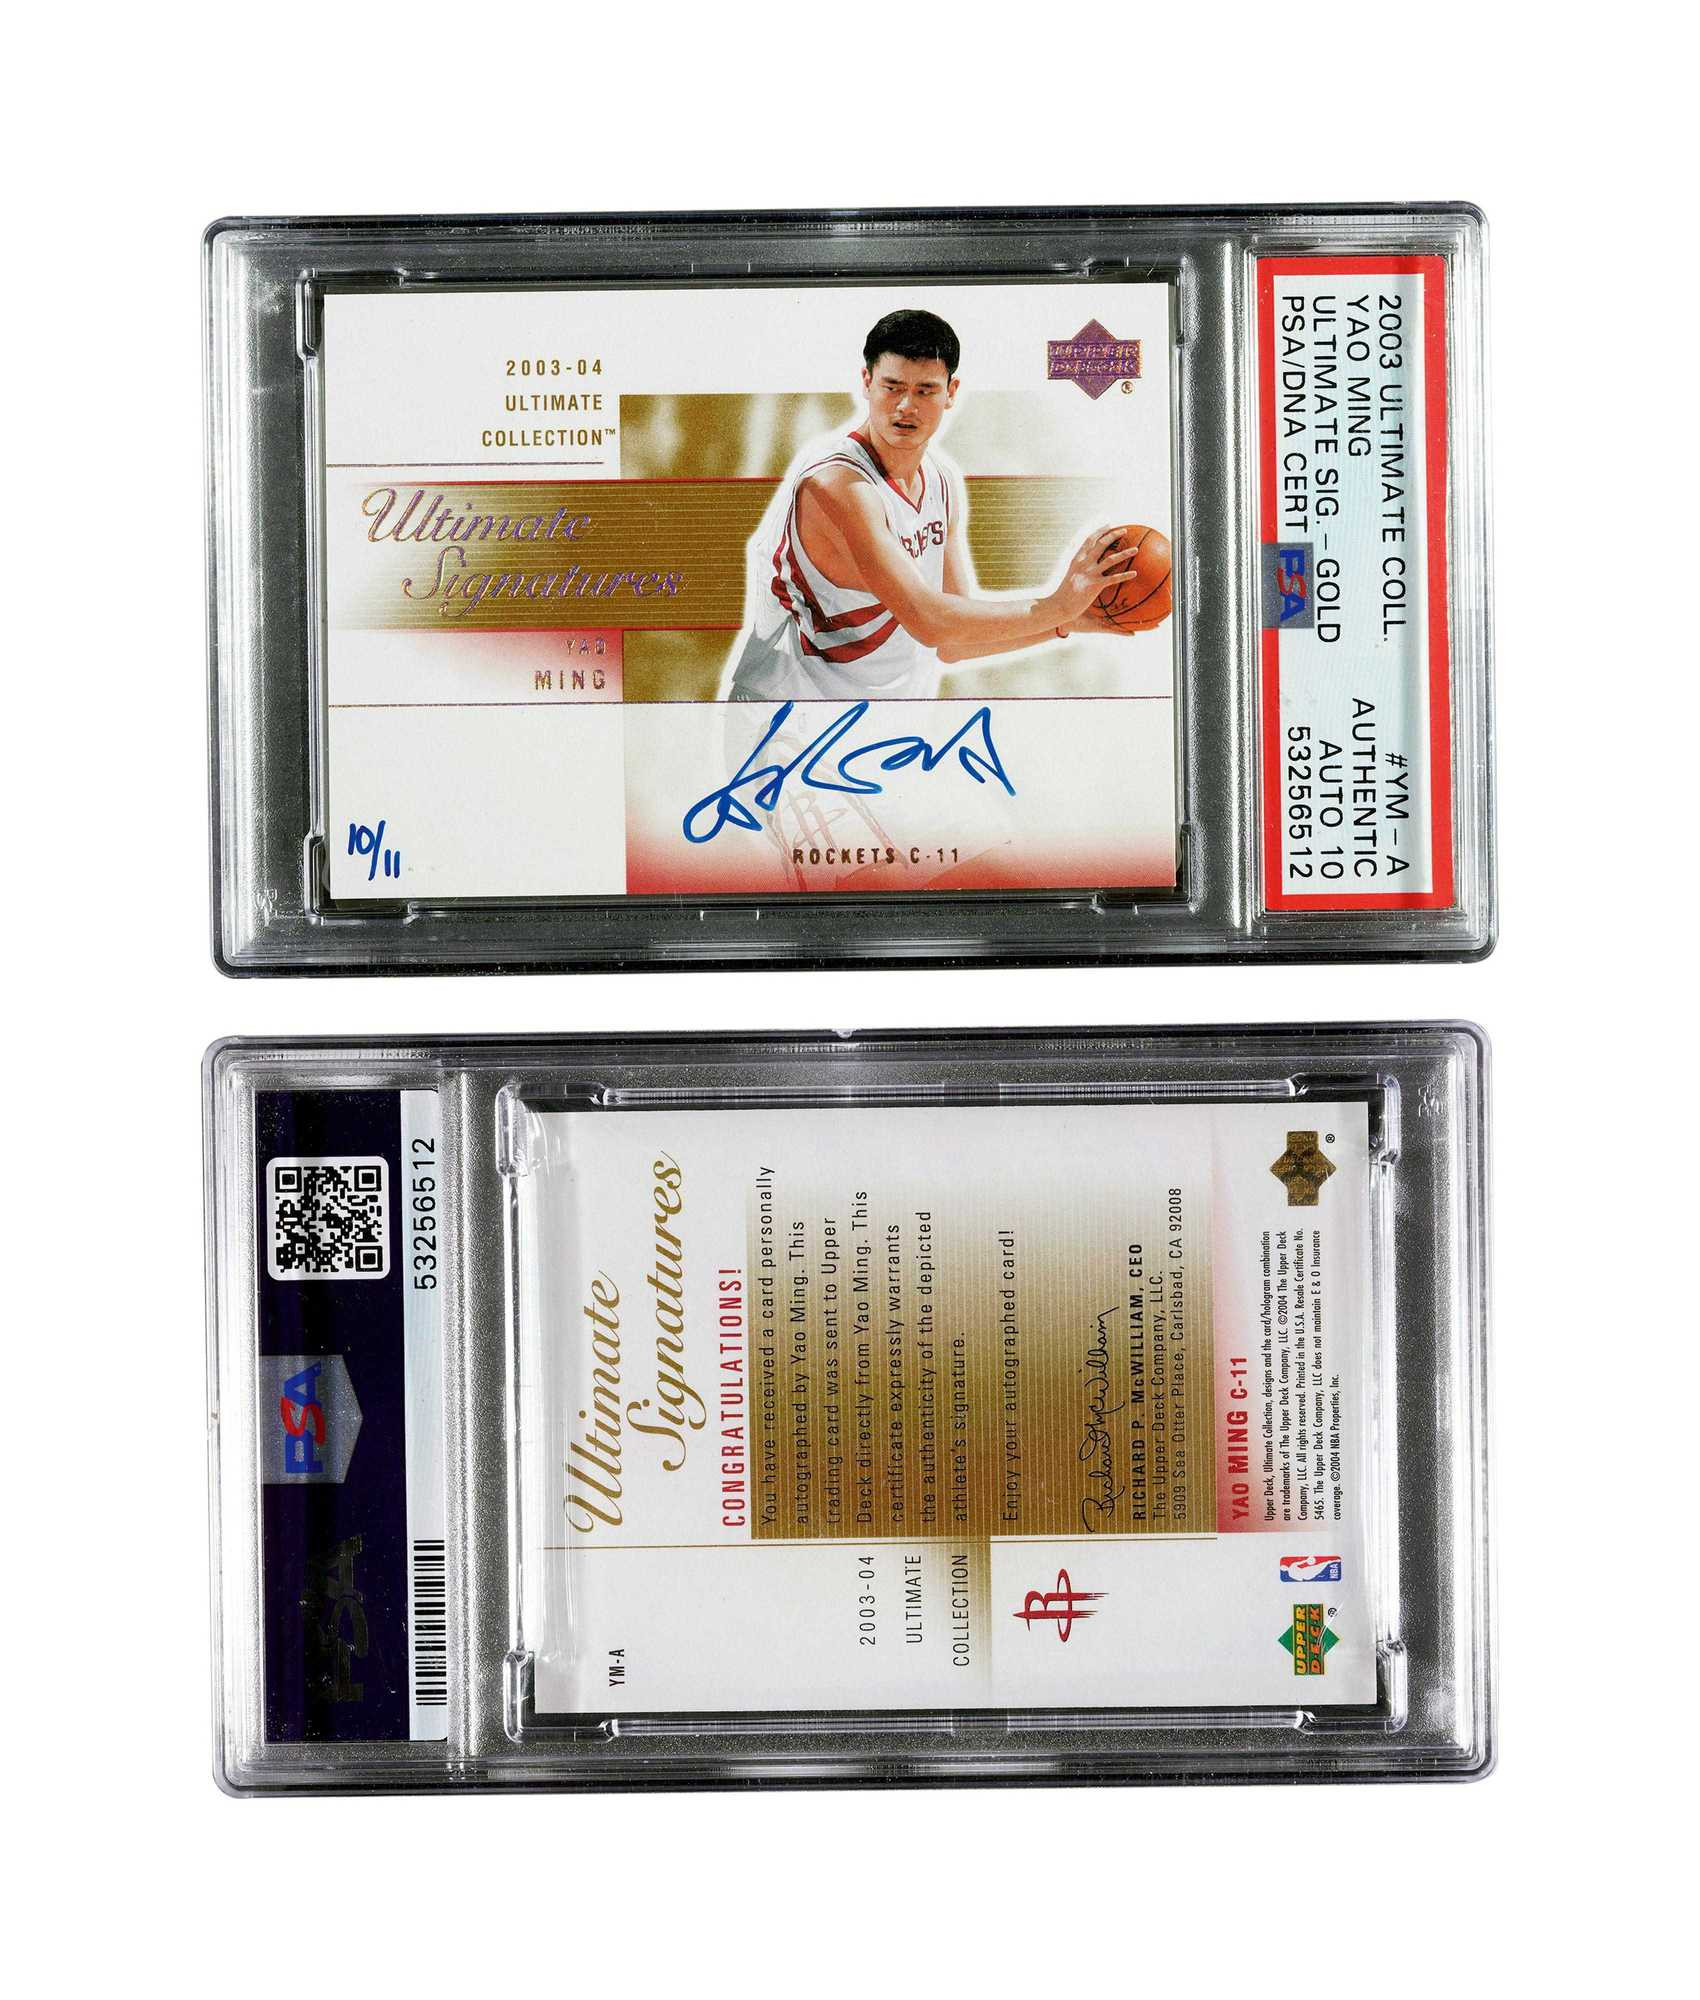 2003-04 Upper Deck Ultimate Collection Ultimate Signatures Yao Ming 10/11 PSA Auto 10